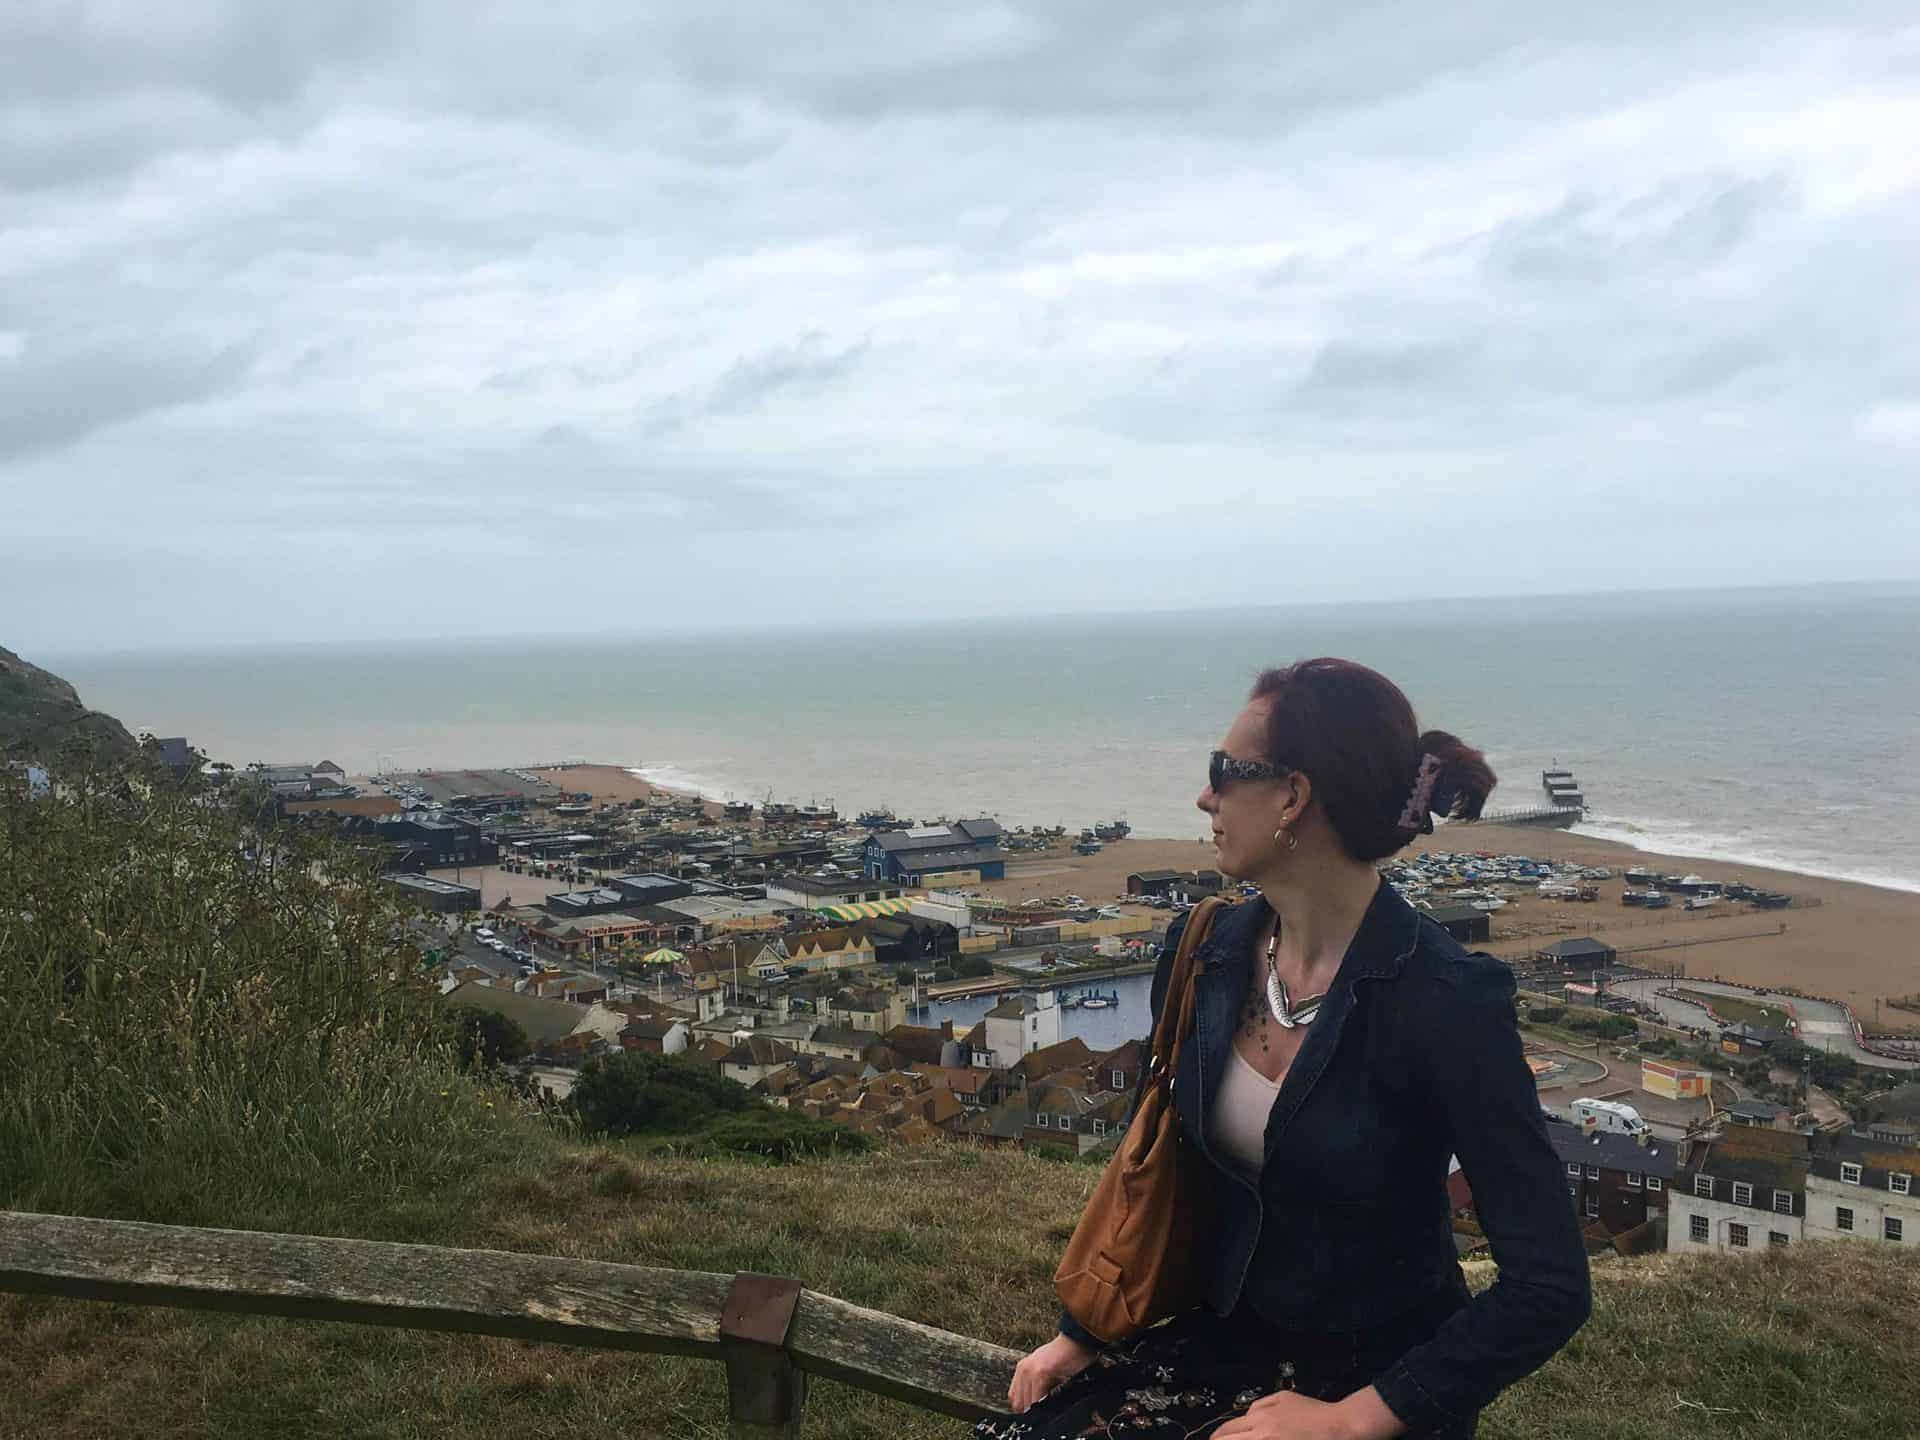 Landscape photo of Julia Epiphany at a seaside town.